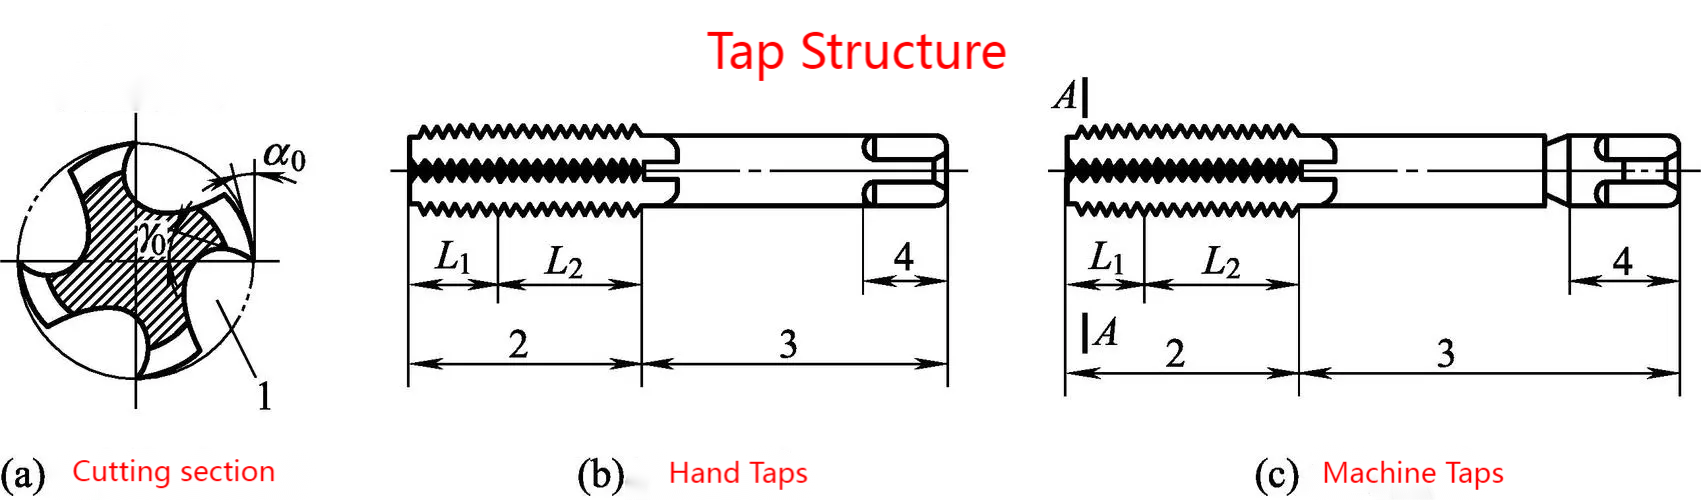 Tap Structure